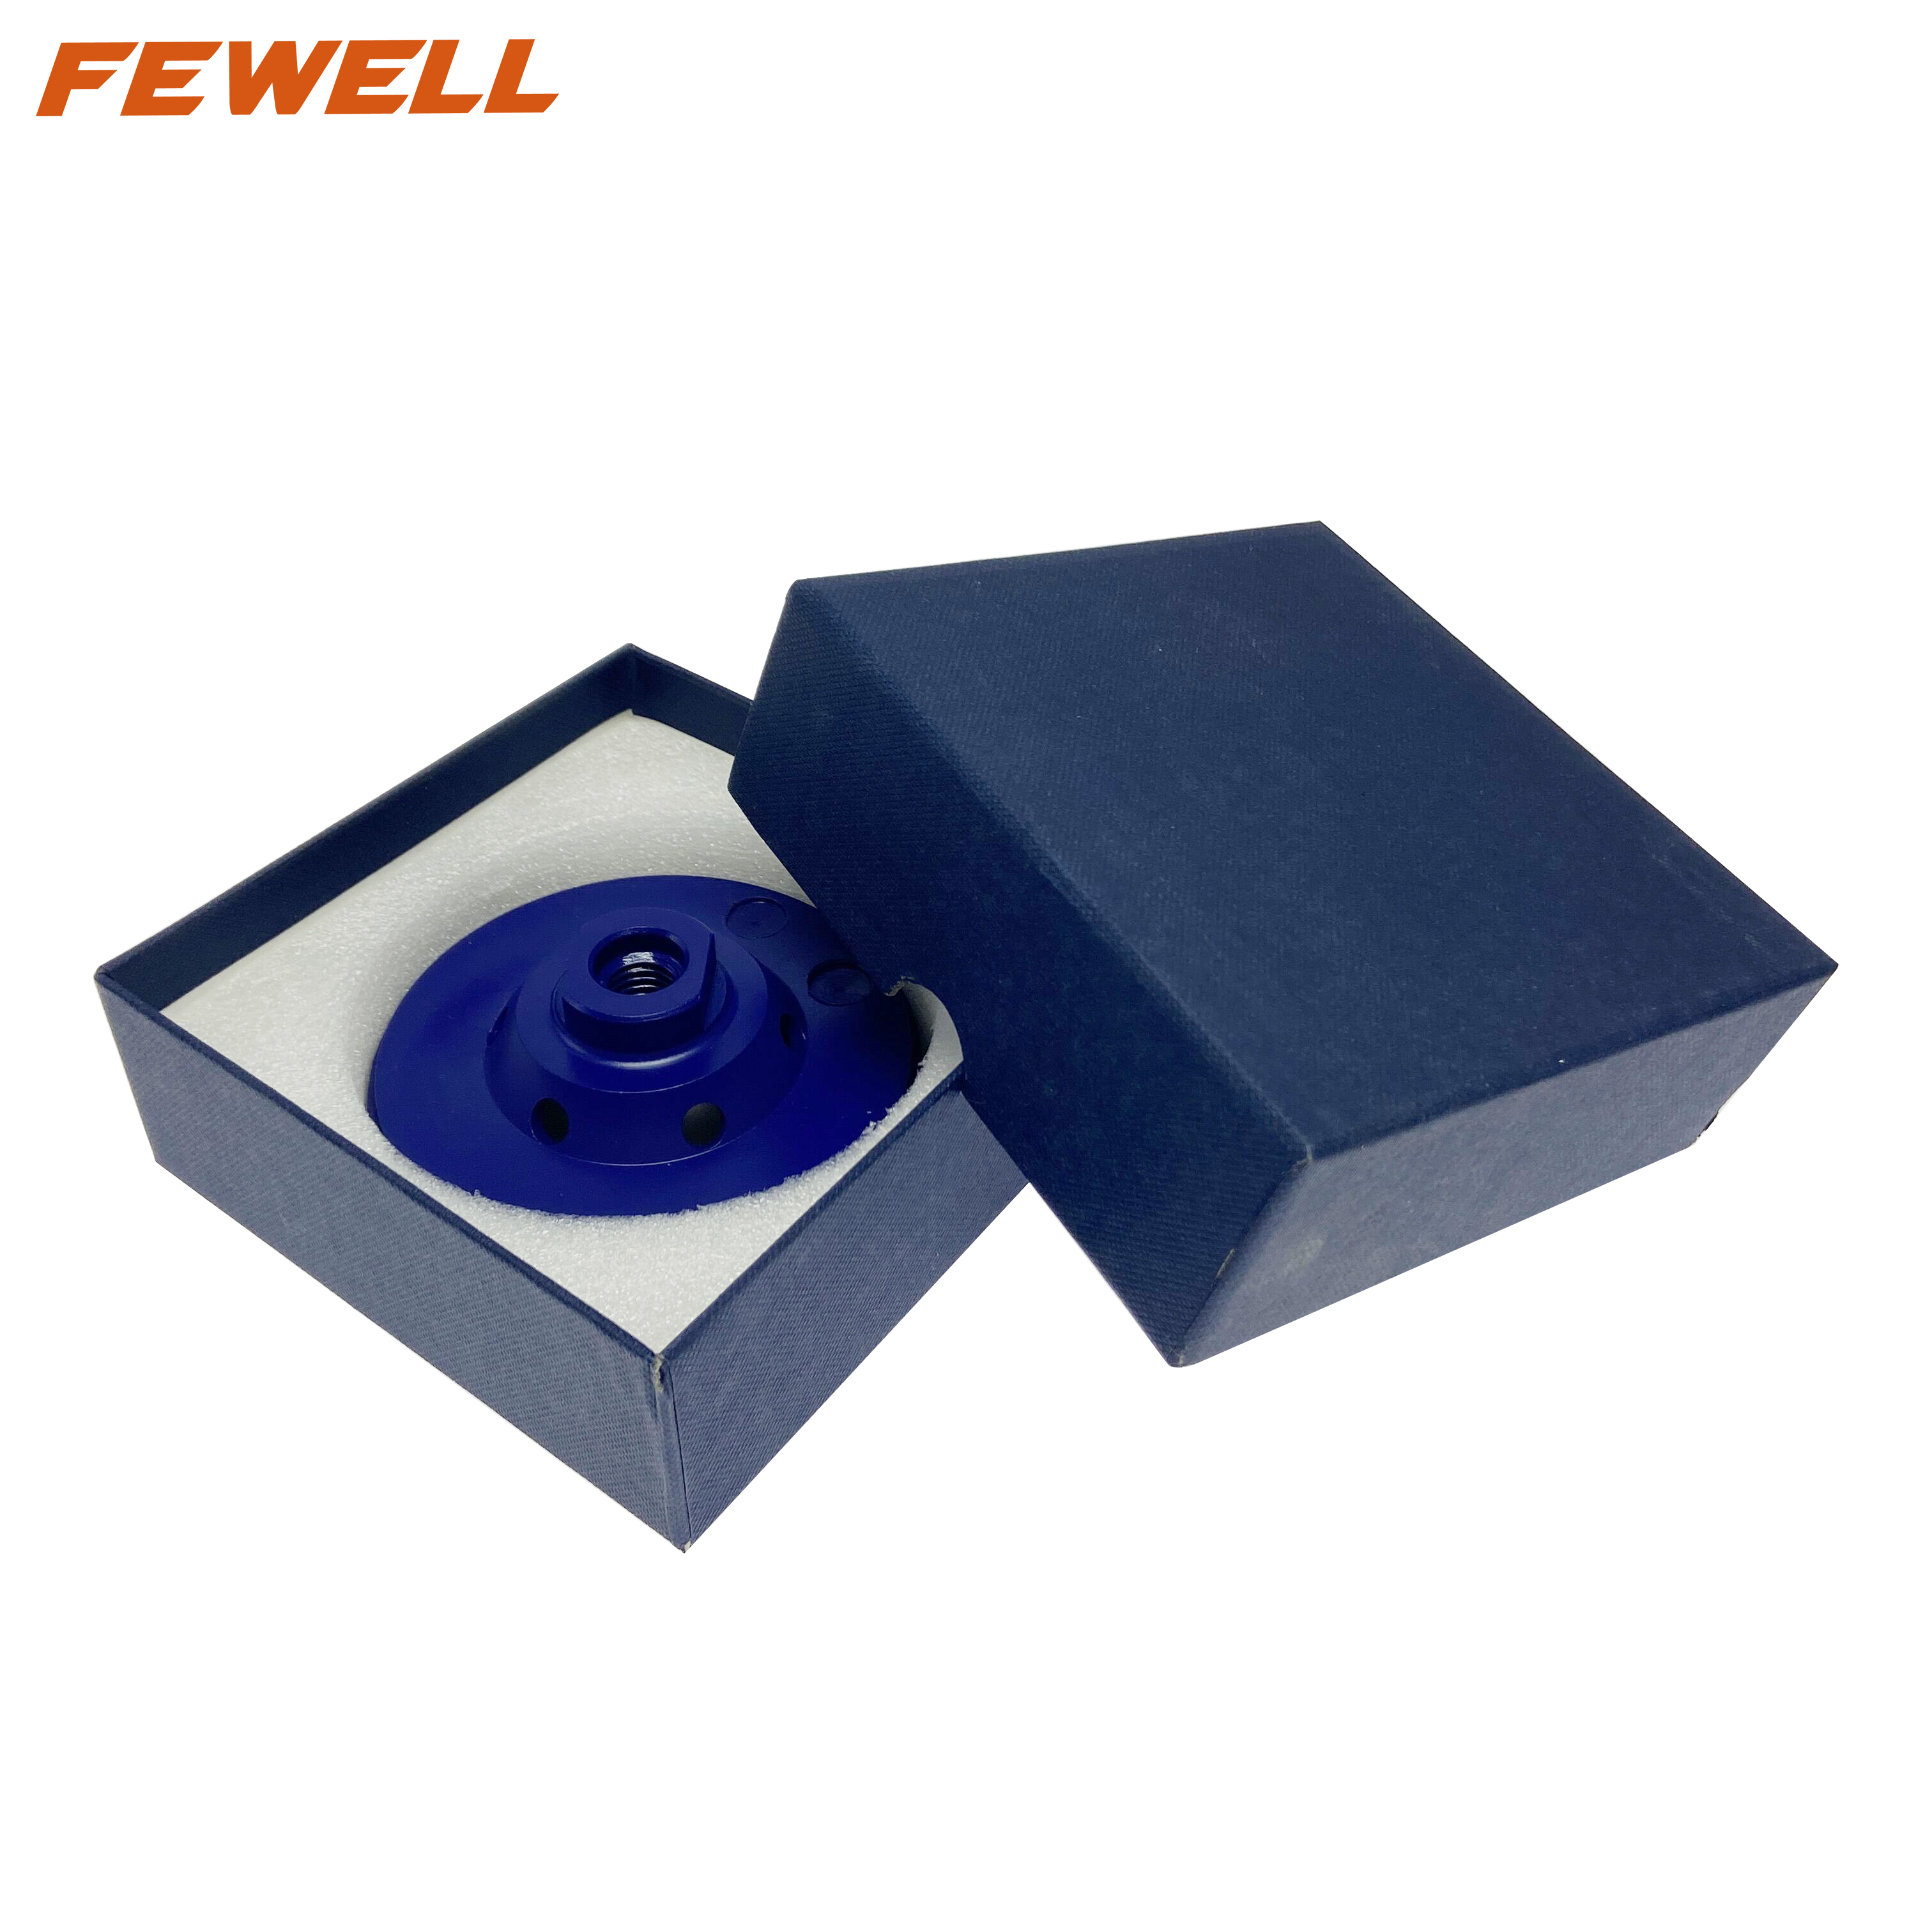 High quality Cold Press sintered 4inch 100*M14mm diamond turbo iron wheel radians grinding cup wheel for concrete granite stone